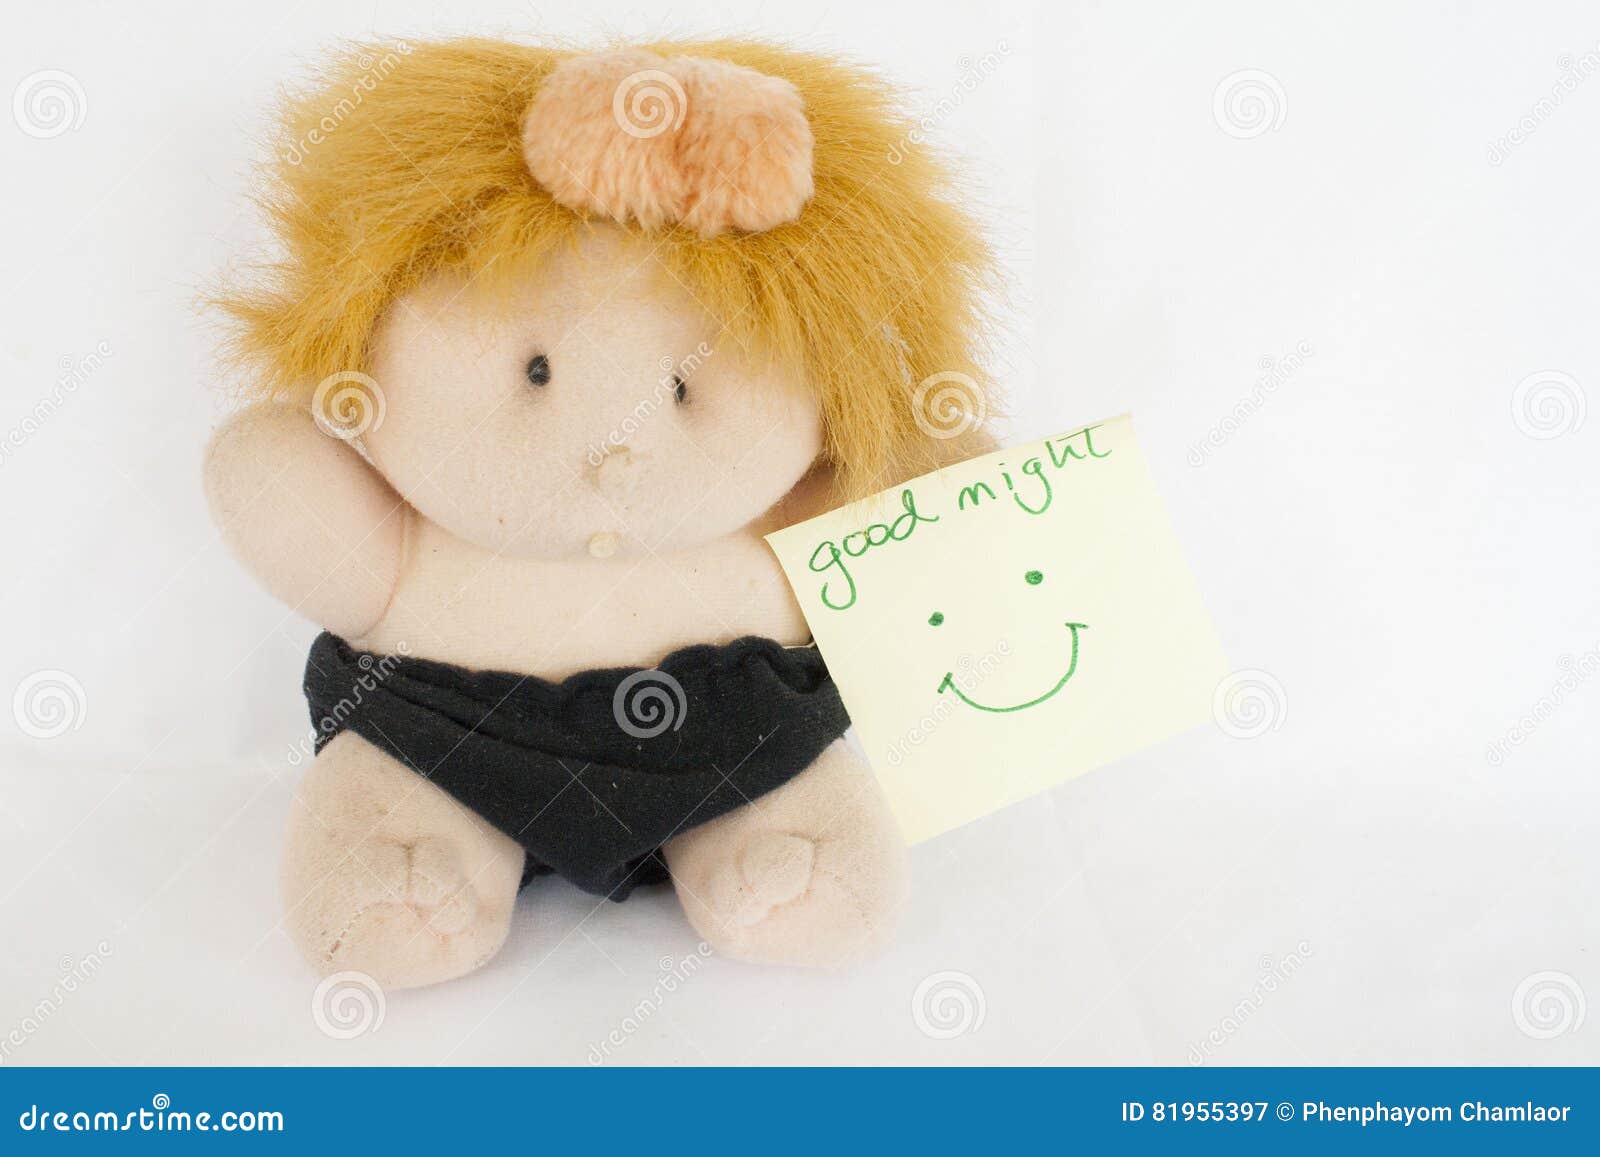 Messages Card and Baby Doll Stock Image - Image of background ...